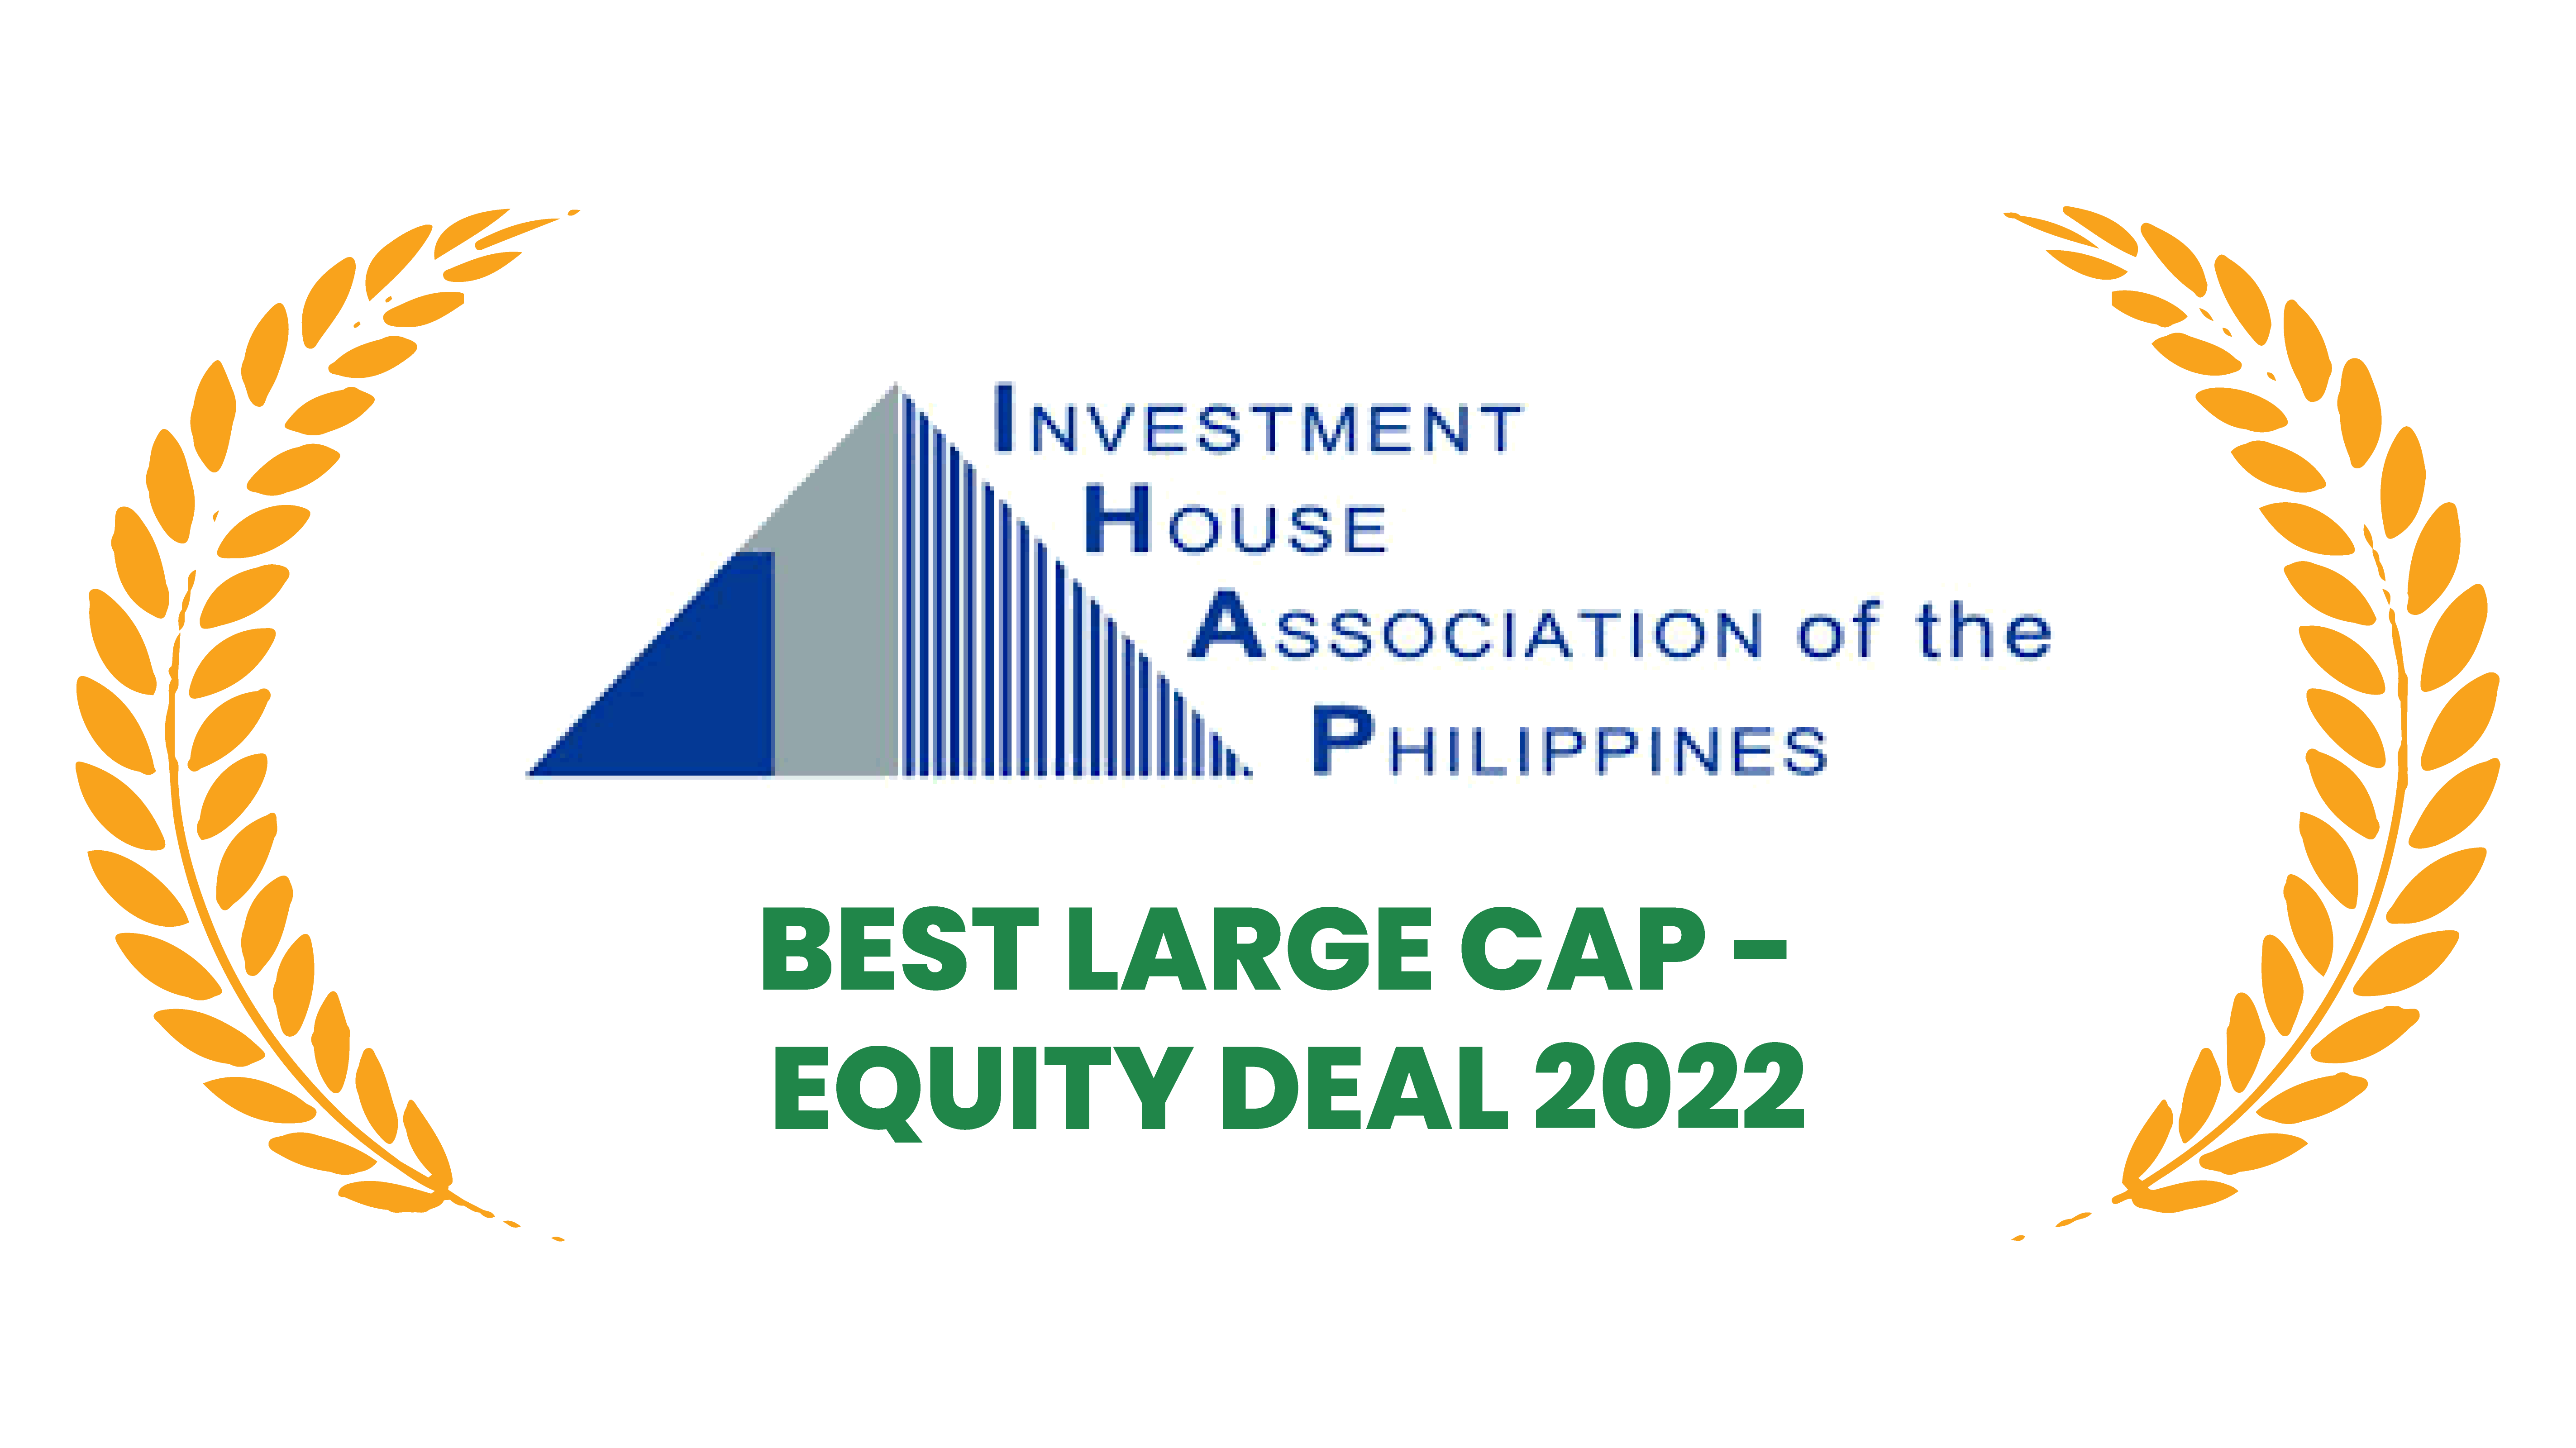 Investment House Association of the Philippines - Best Large Cap - Equity Deal 2022